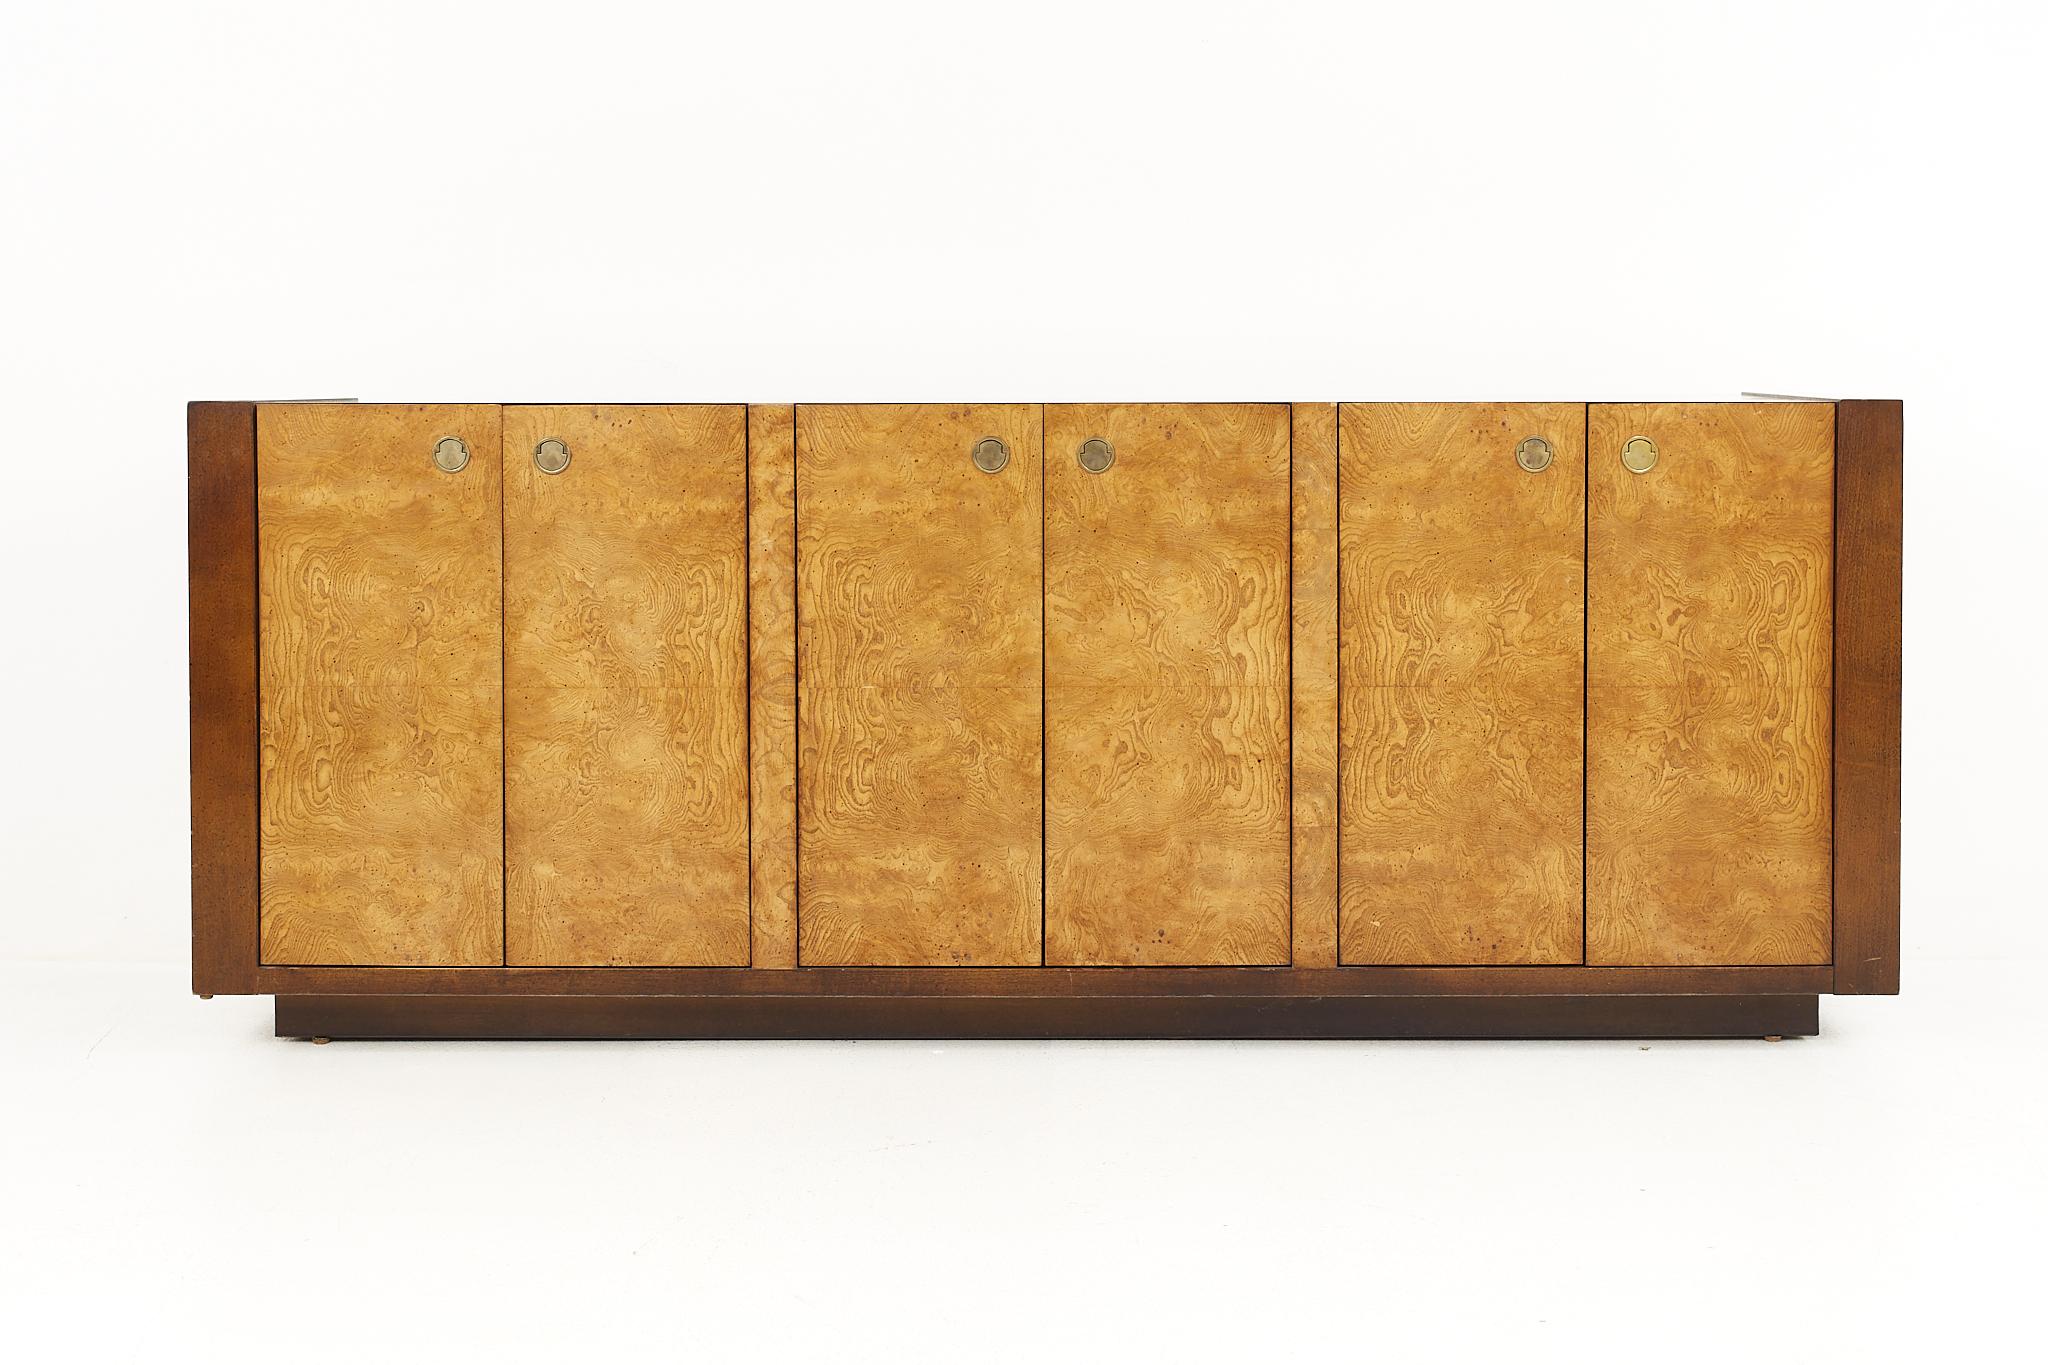 Century Furniture mid-century burlwood buffet credenza.

The credenza measures: 76 wide x 18 deep x 29.25 inches high

All pieces of furniture can be had in what we call restored vintage condition. That means the piece is restored upon purchase